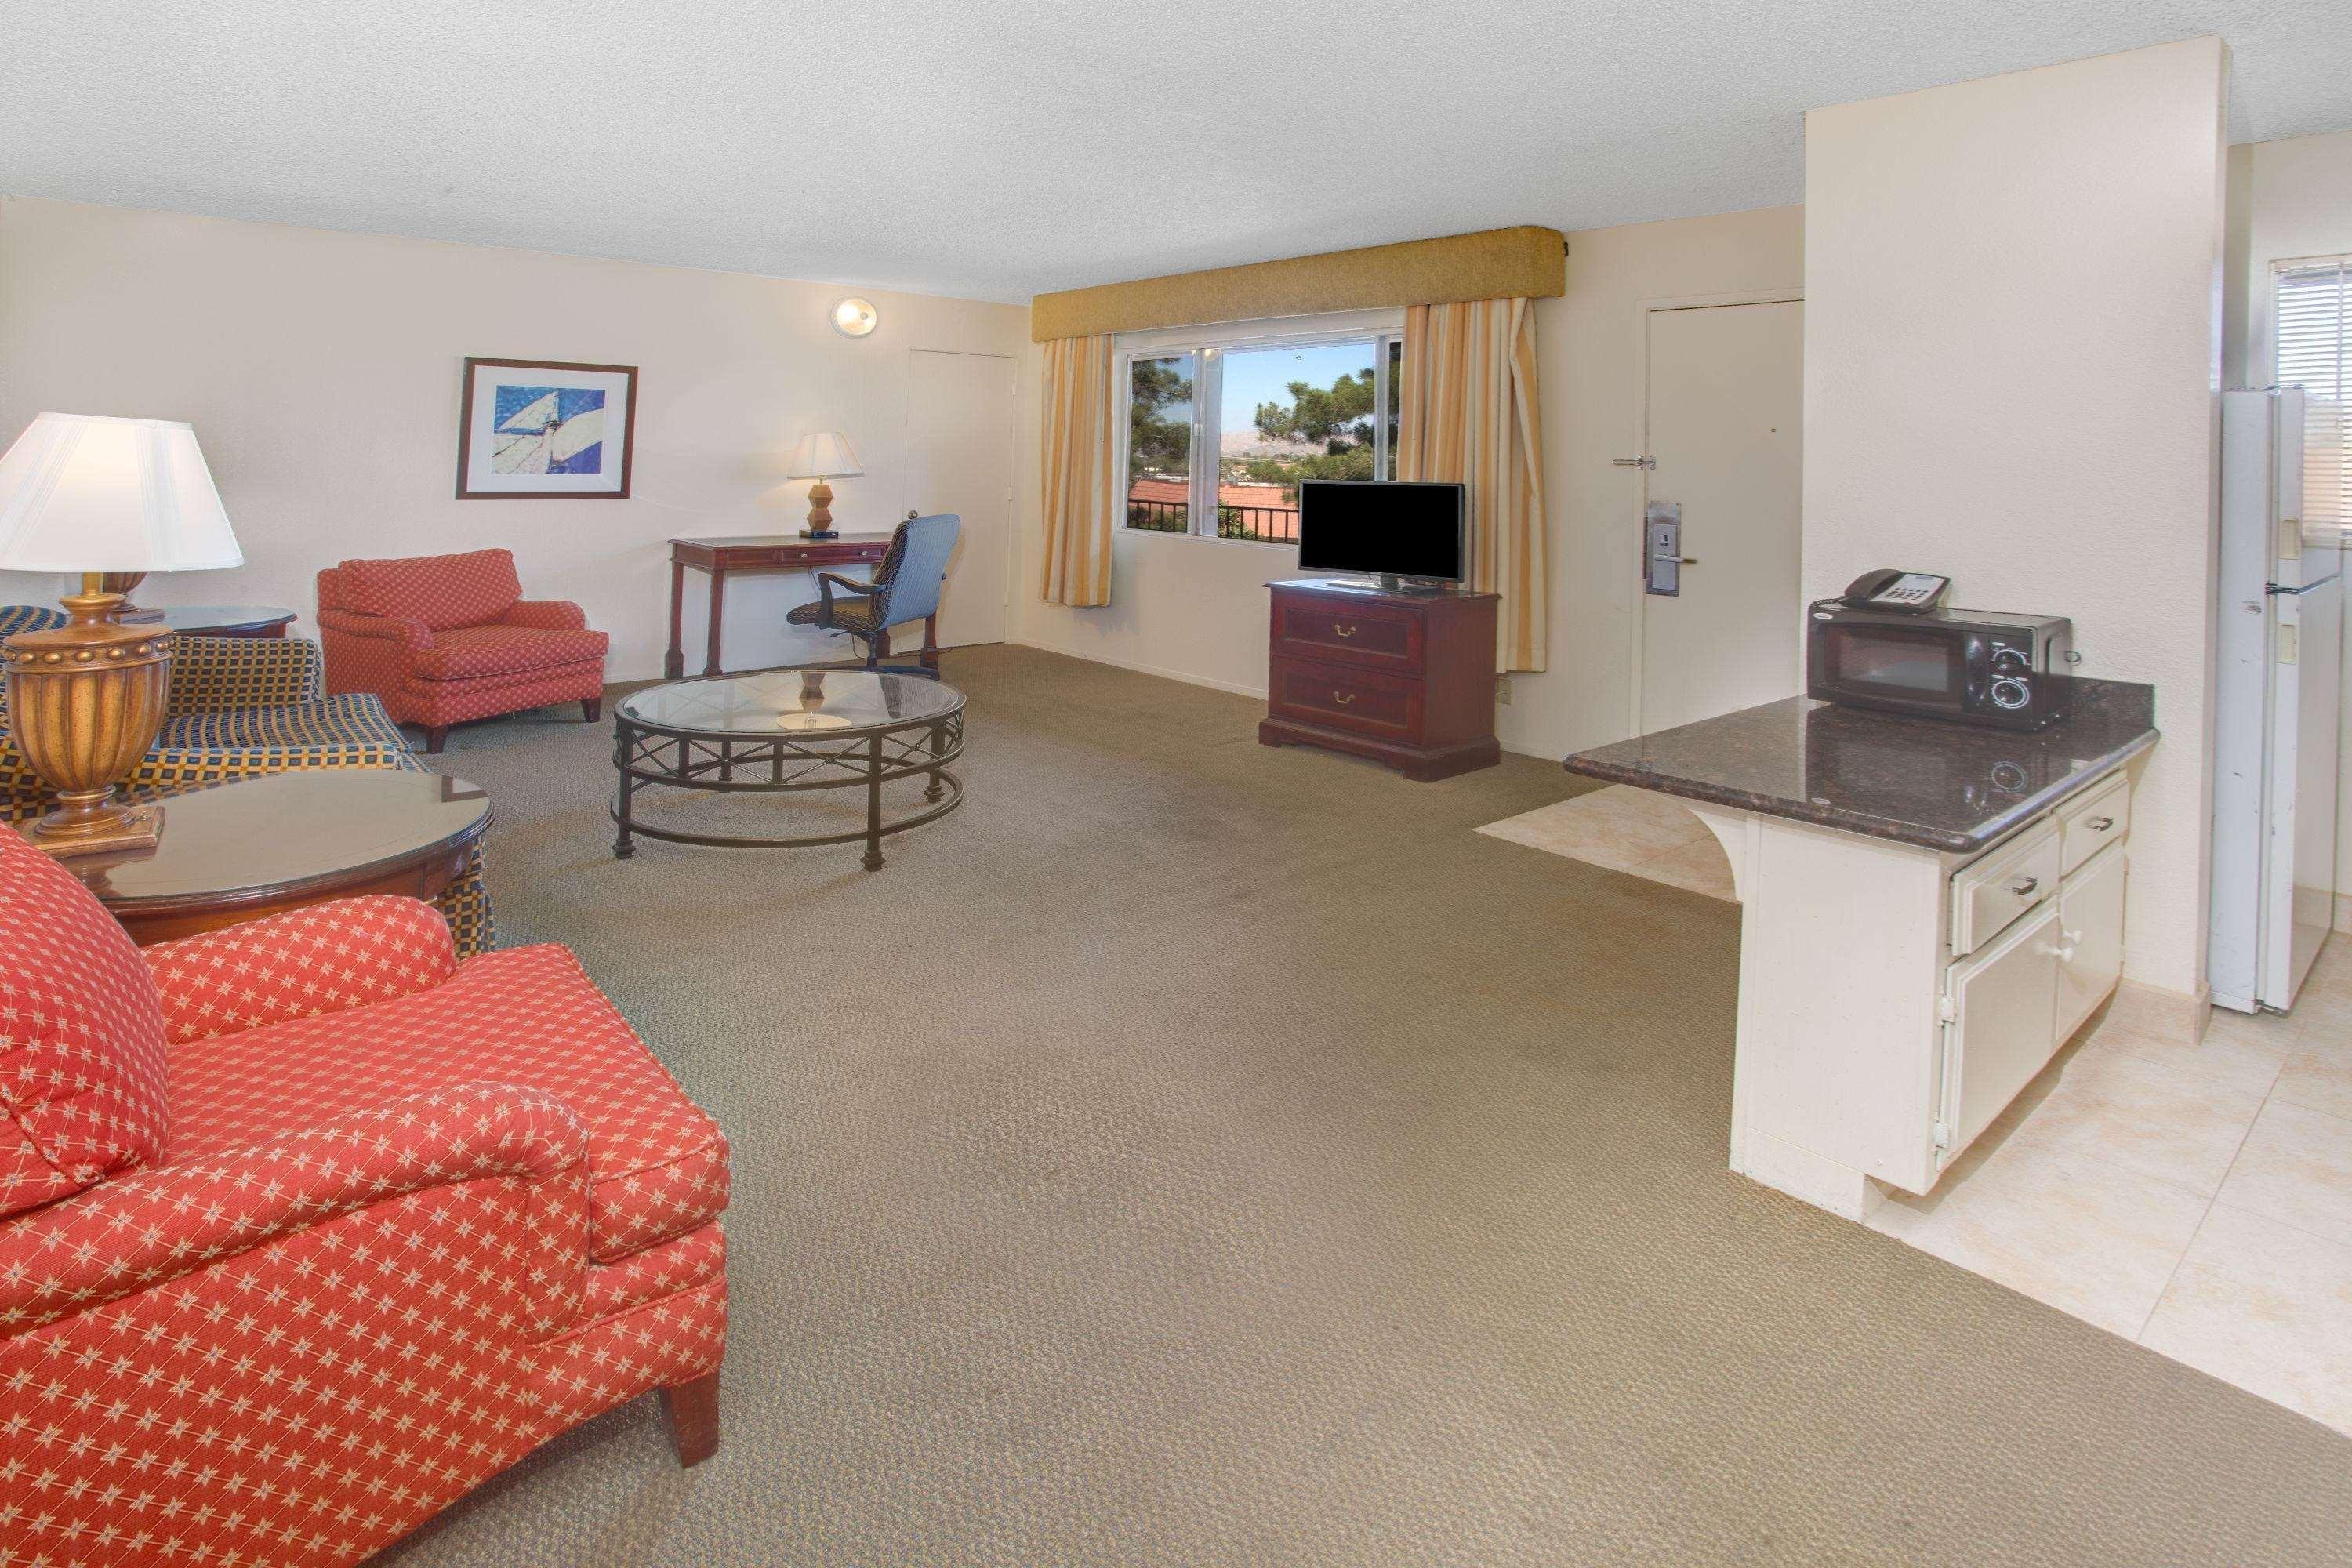 Travelodge Inn & Suites By Wyndham Yucca Valley/Joshua Tree Extérieur photo